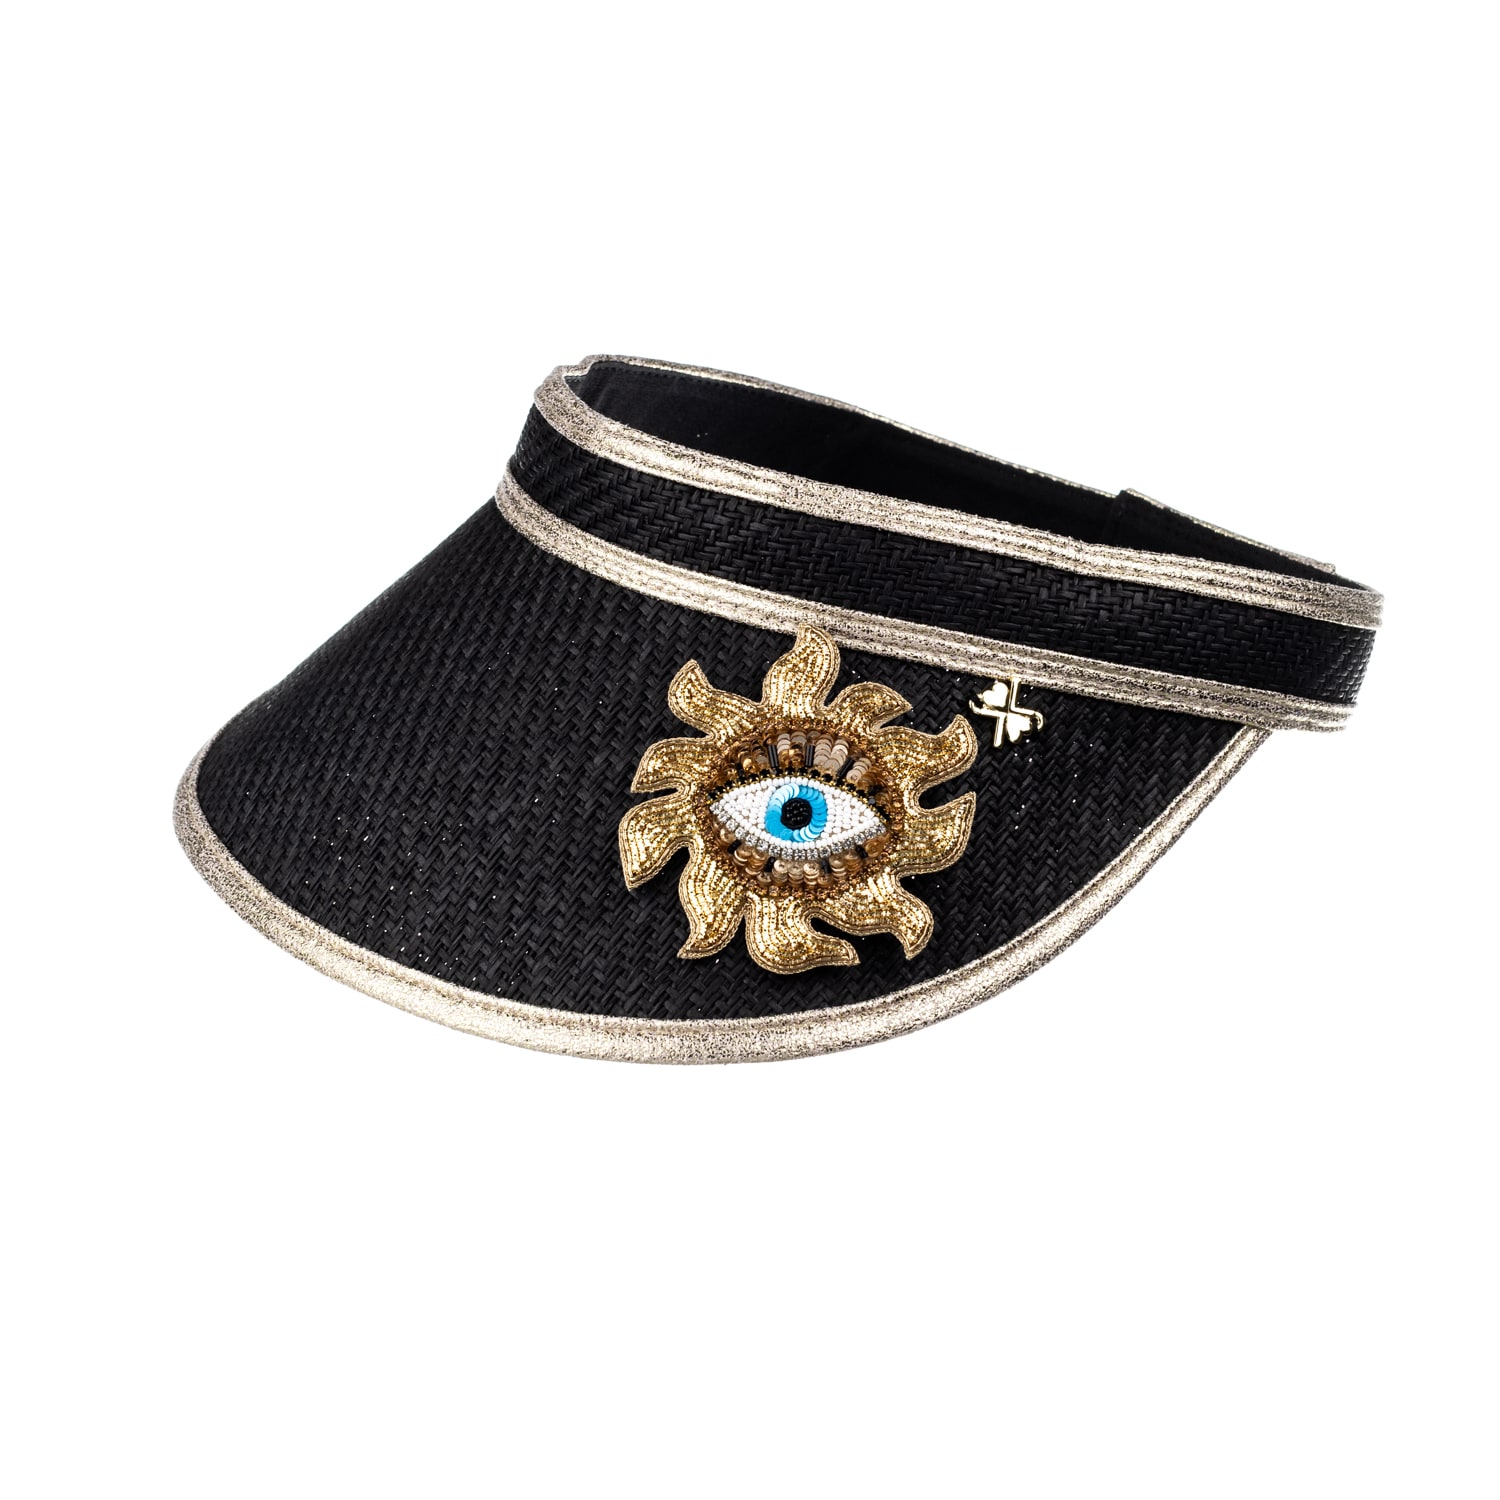 Women’s Straw Woven Visor With Embellished Mystic Eye Brooch - Black One Size Laines London